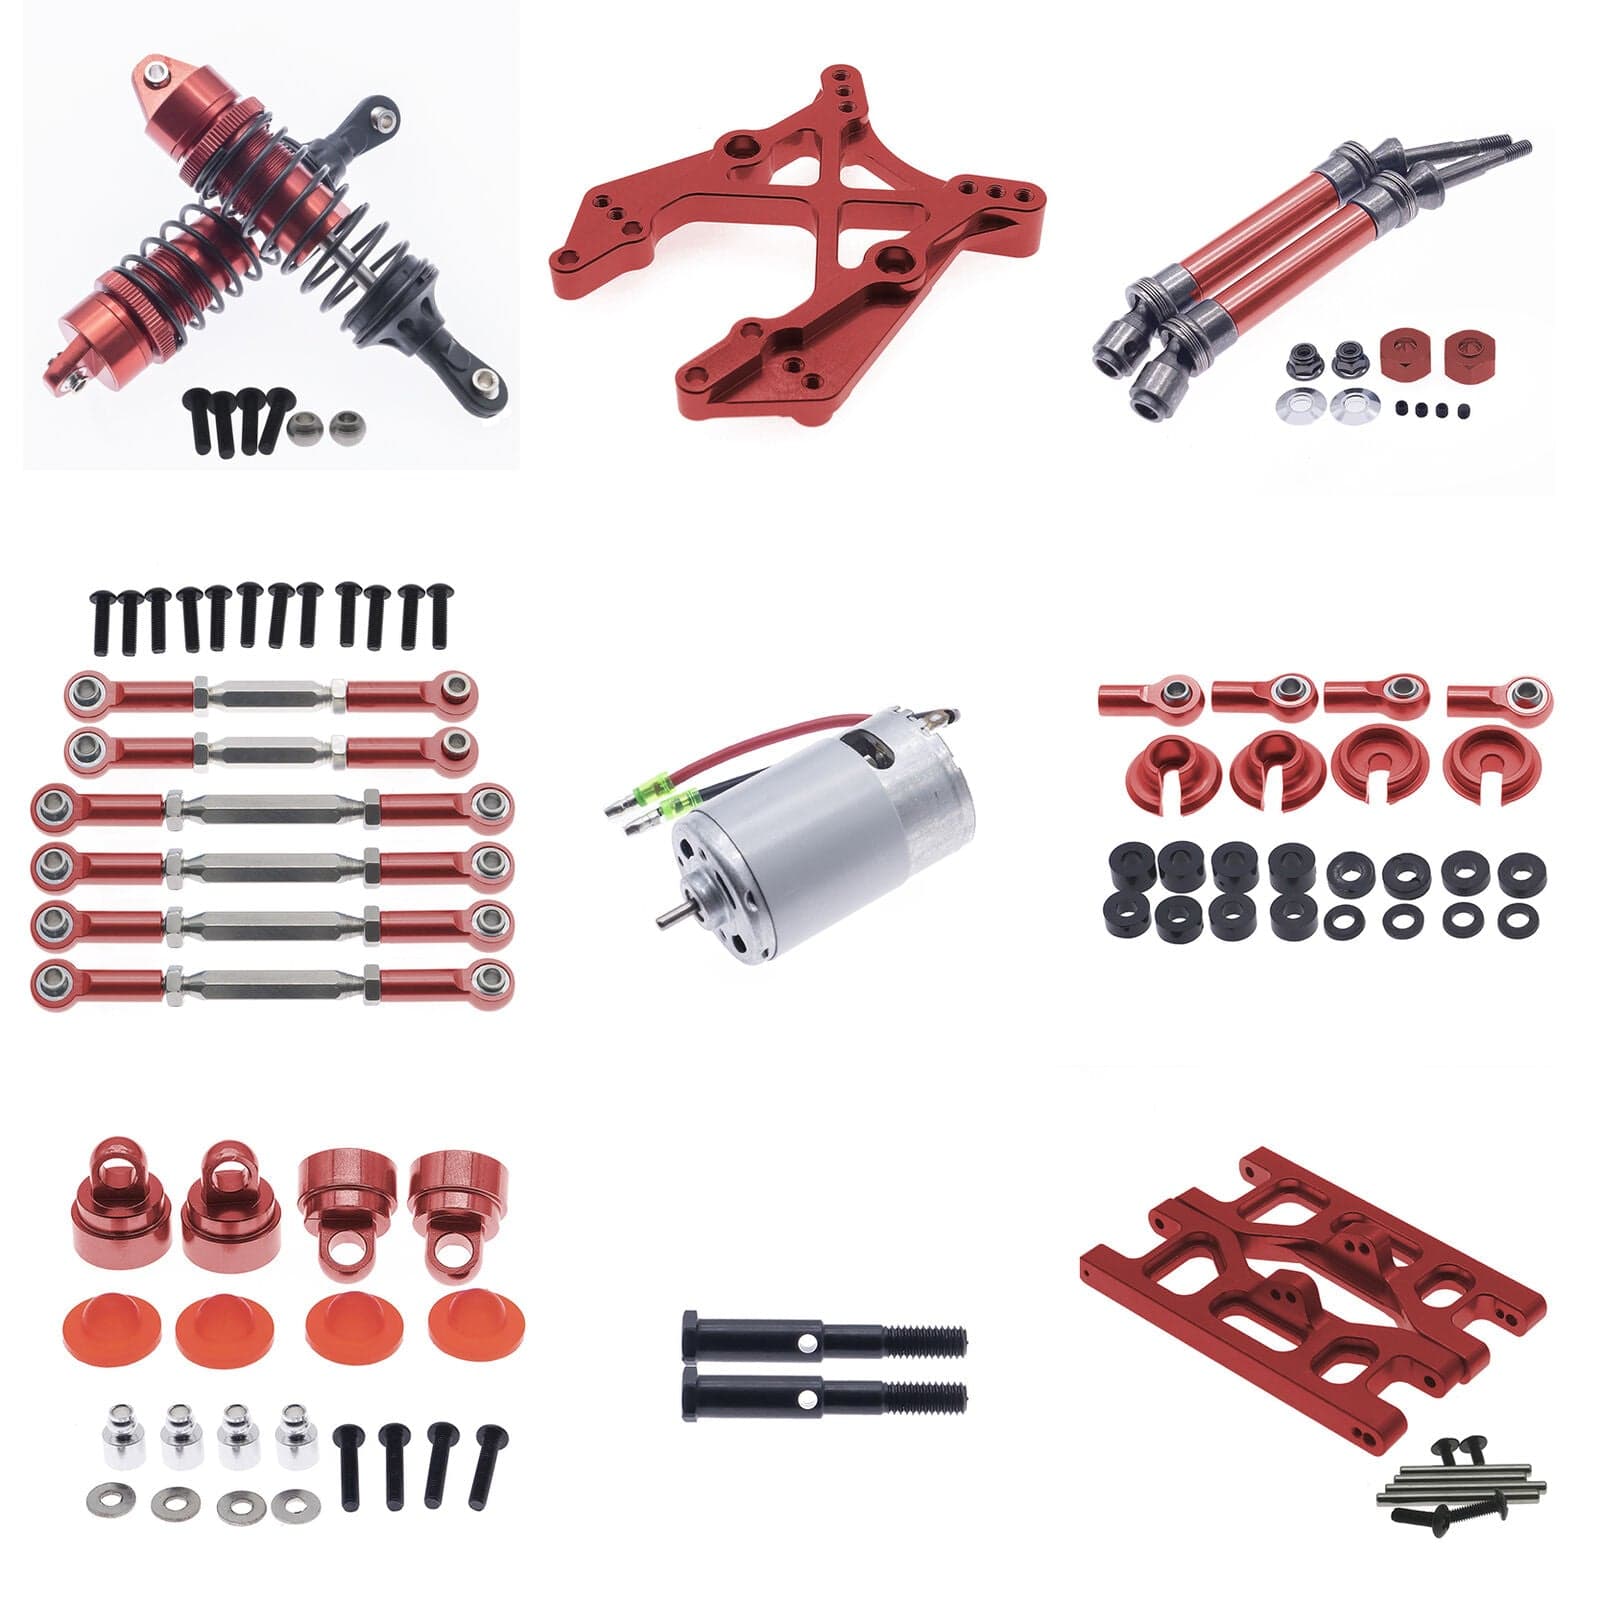 RCAWD ECX UPGRADE PARTS RCAWD Aluminum CNC DIY Upgrade Hop-up parts For 1-10 ECX 2WD Series Ruckus AMP red